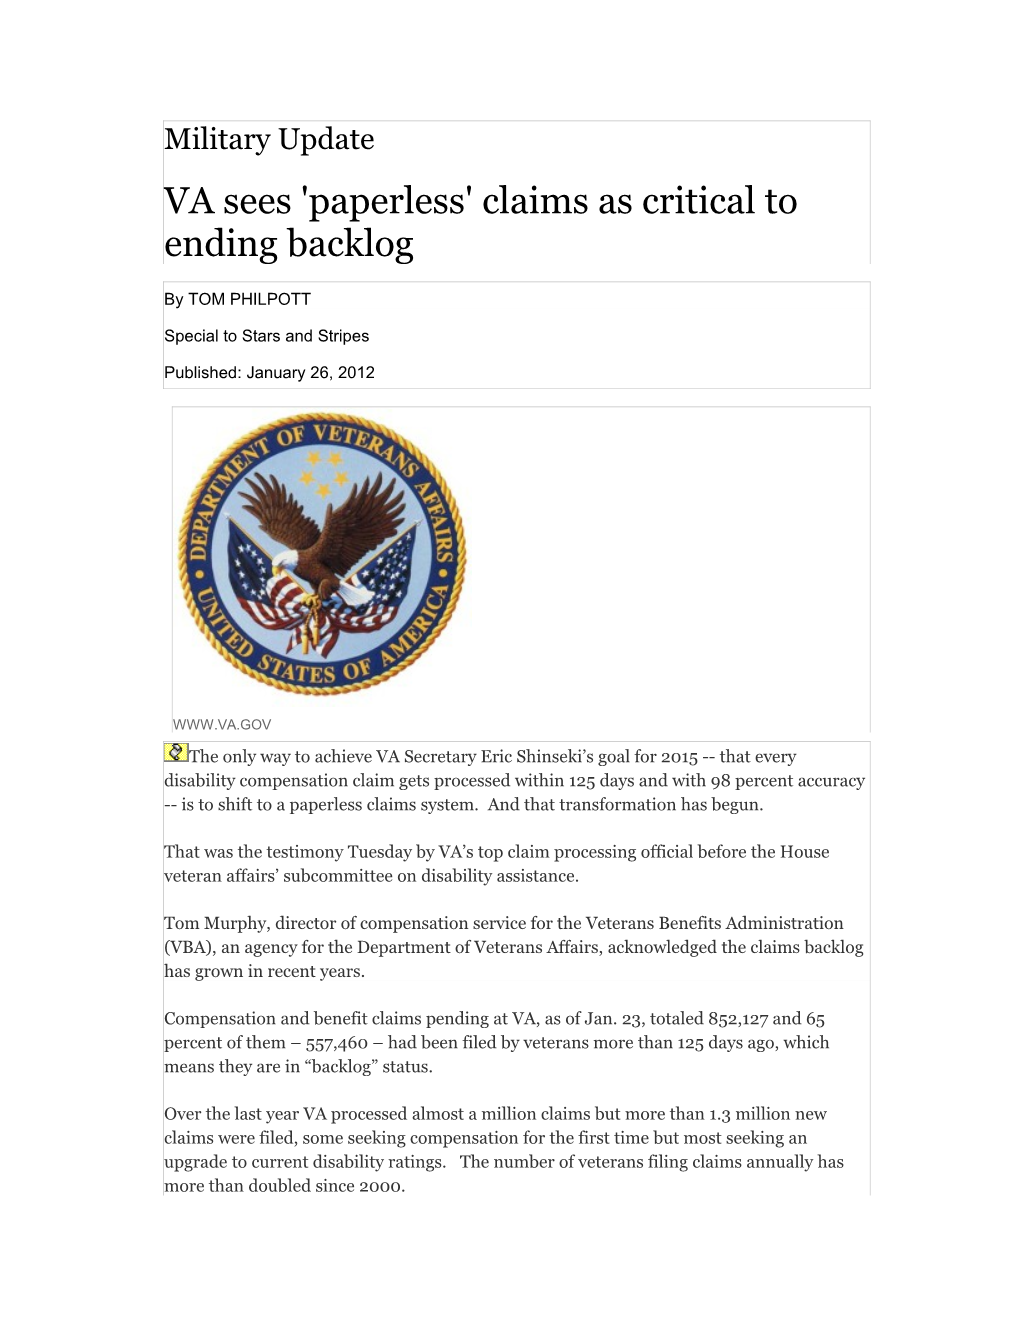 VA Sees 'Paperless' Claims As Critical to Ending Backlog